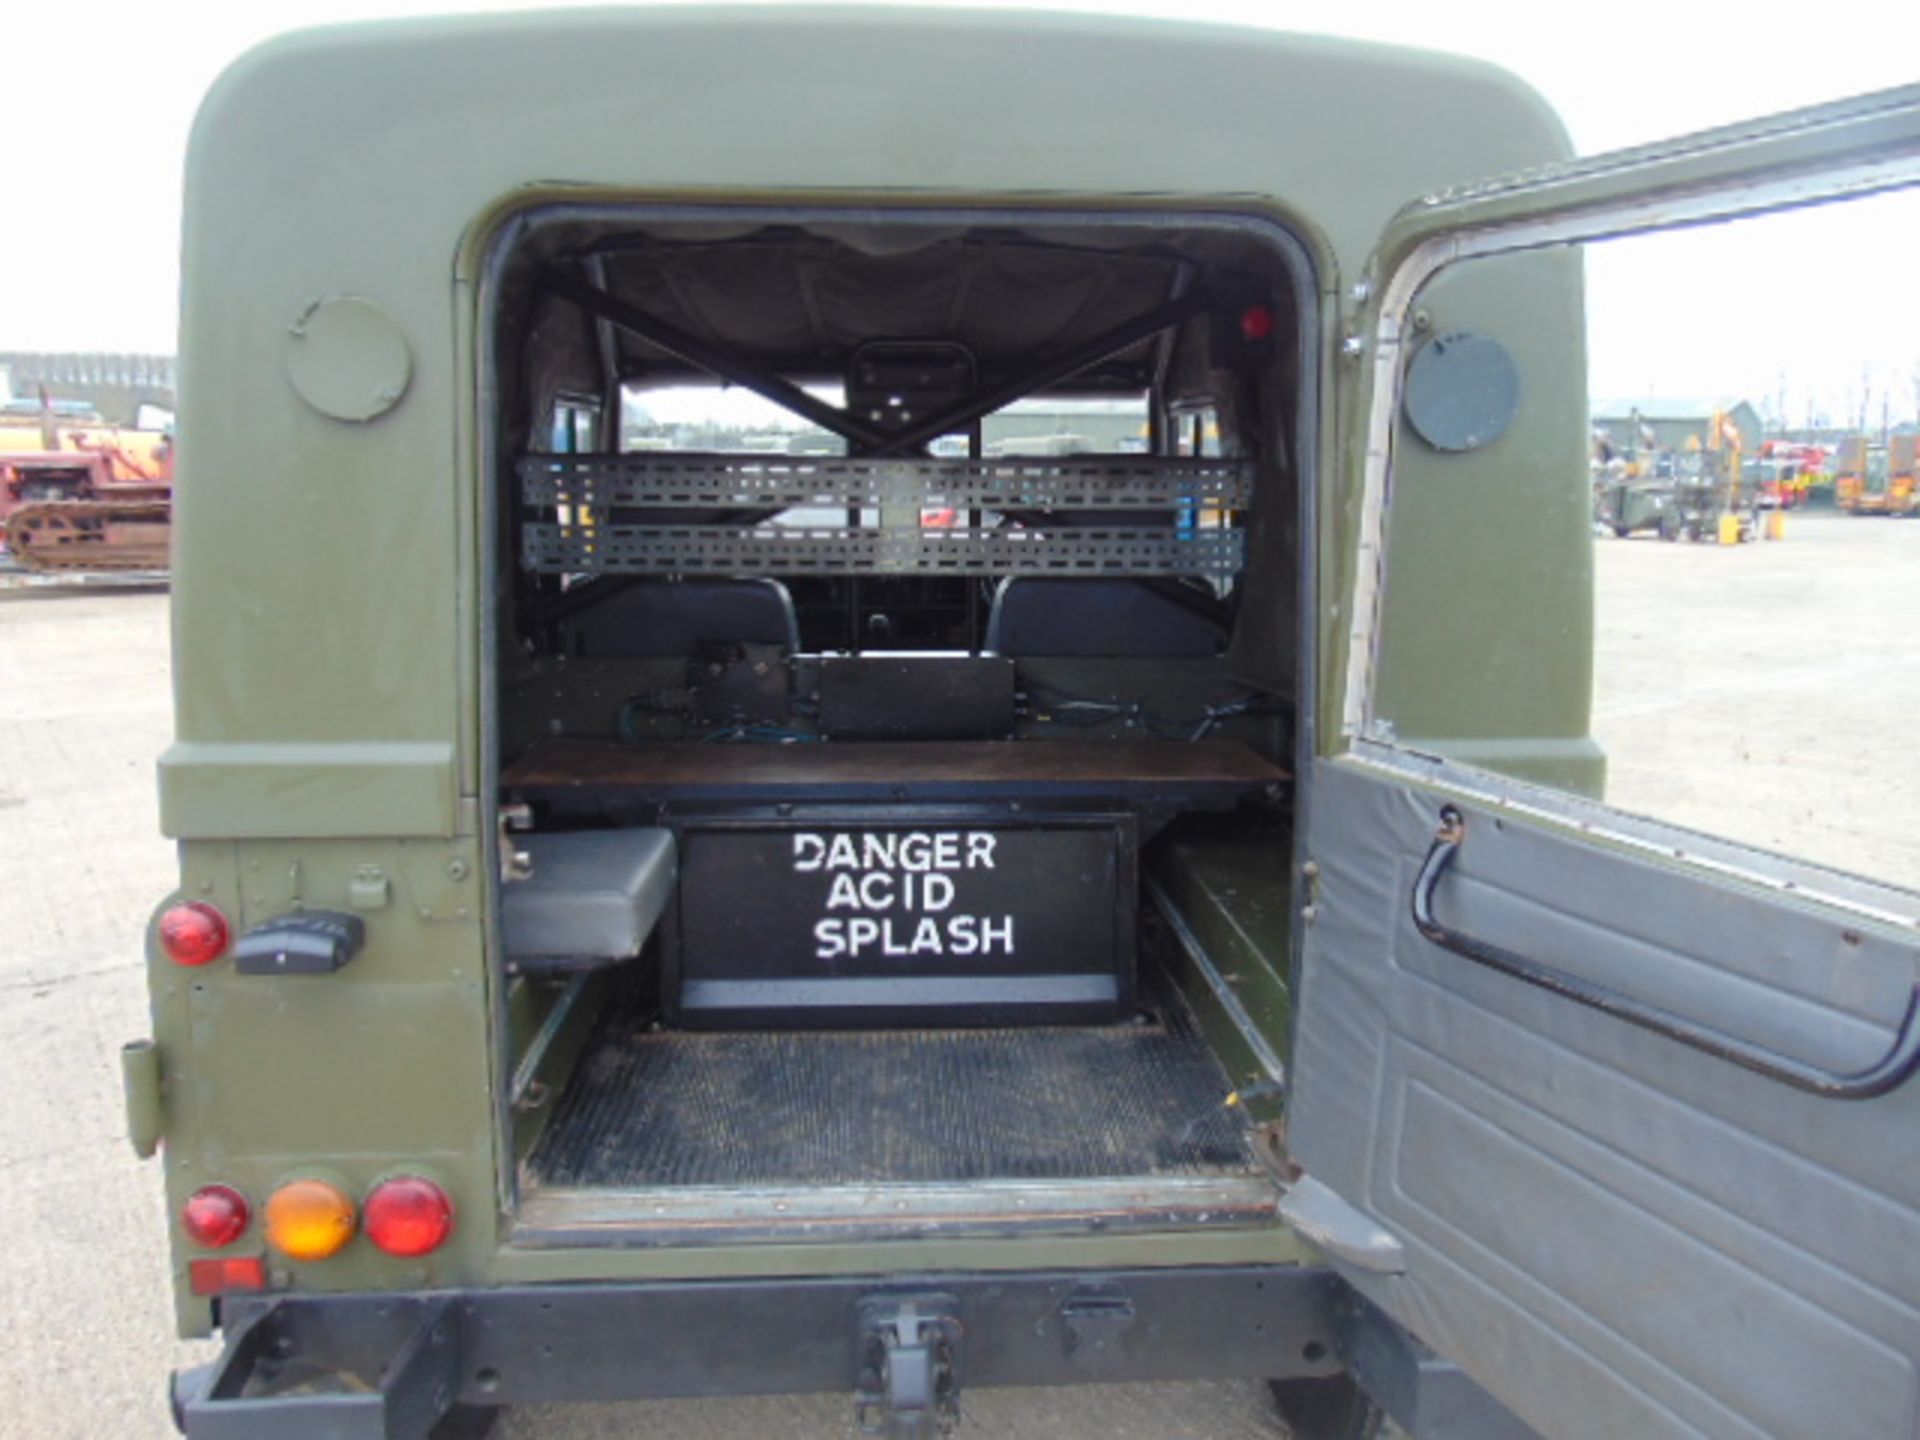 Military Specification Land Rover Wolf 90 Hard Top - Image 11 of 22